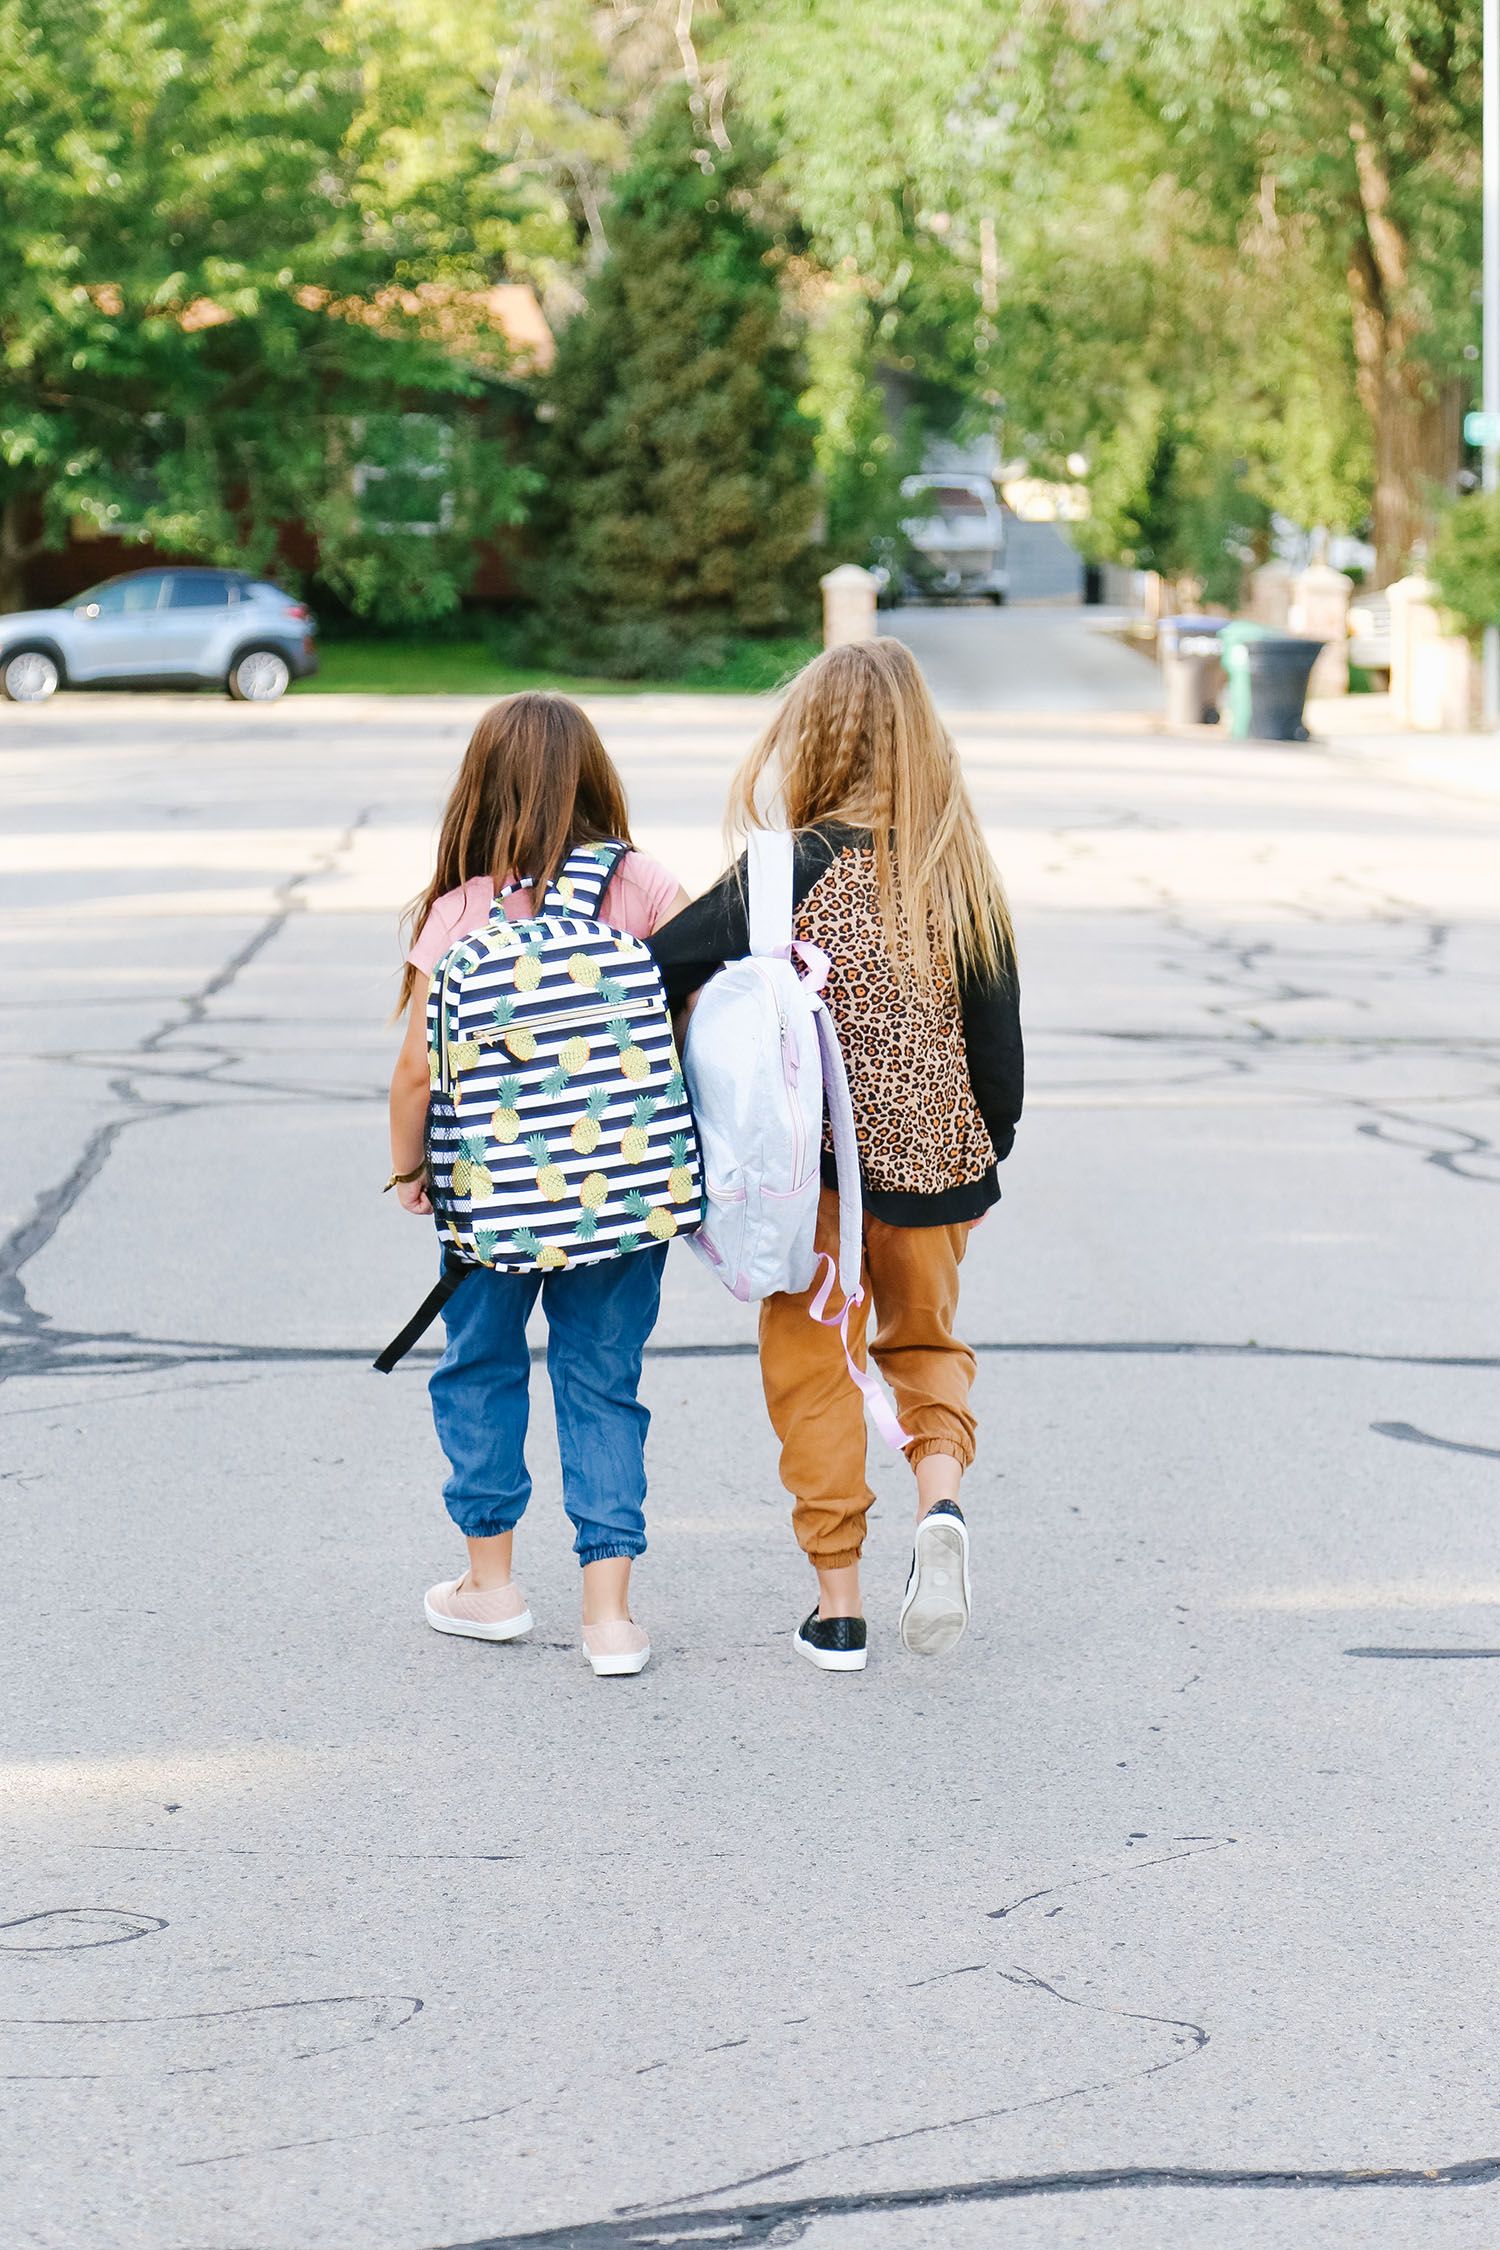 Walmart Back to School Favorites: Outfits, Supplies & Backpacks featured by US lifestyle blogger, By Jen Rose